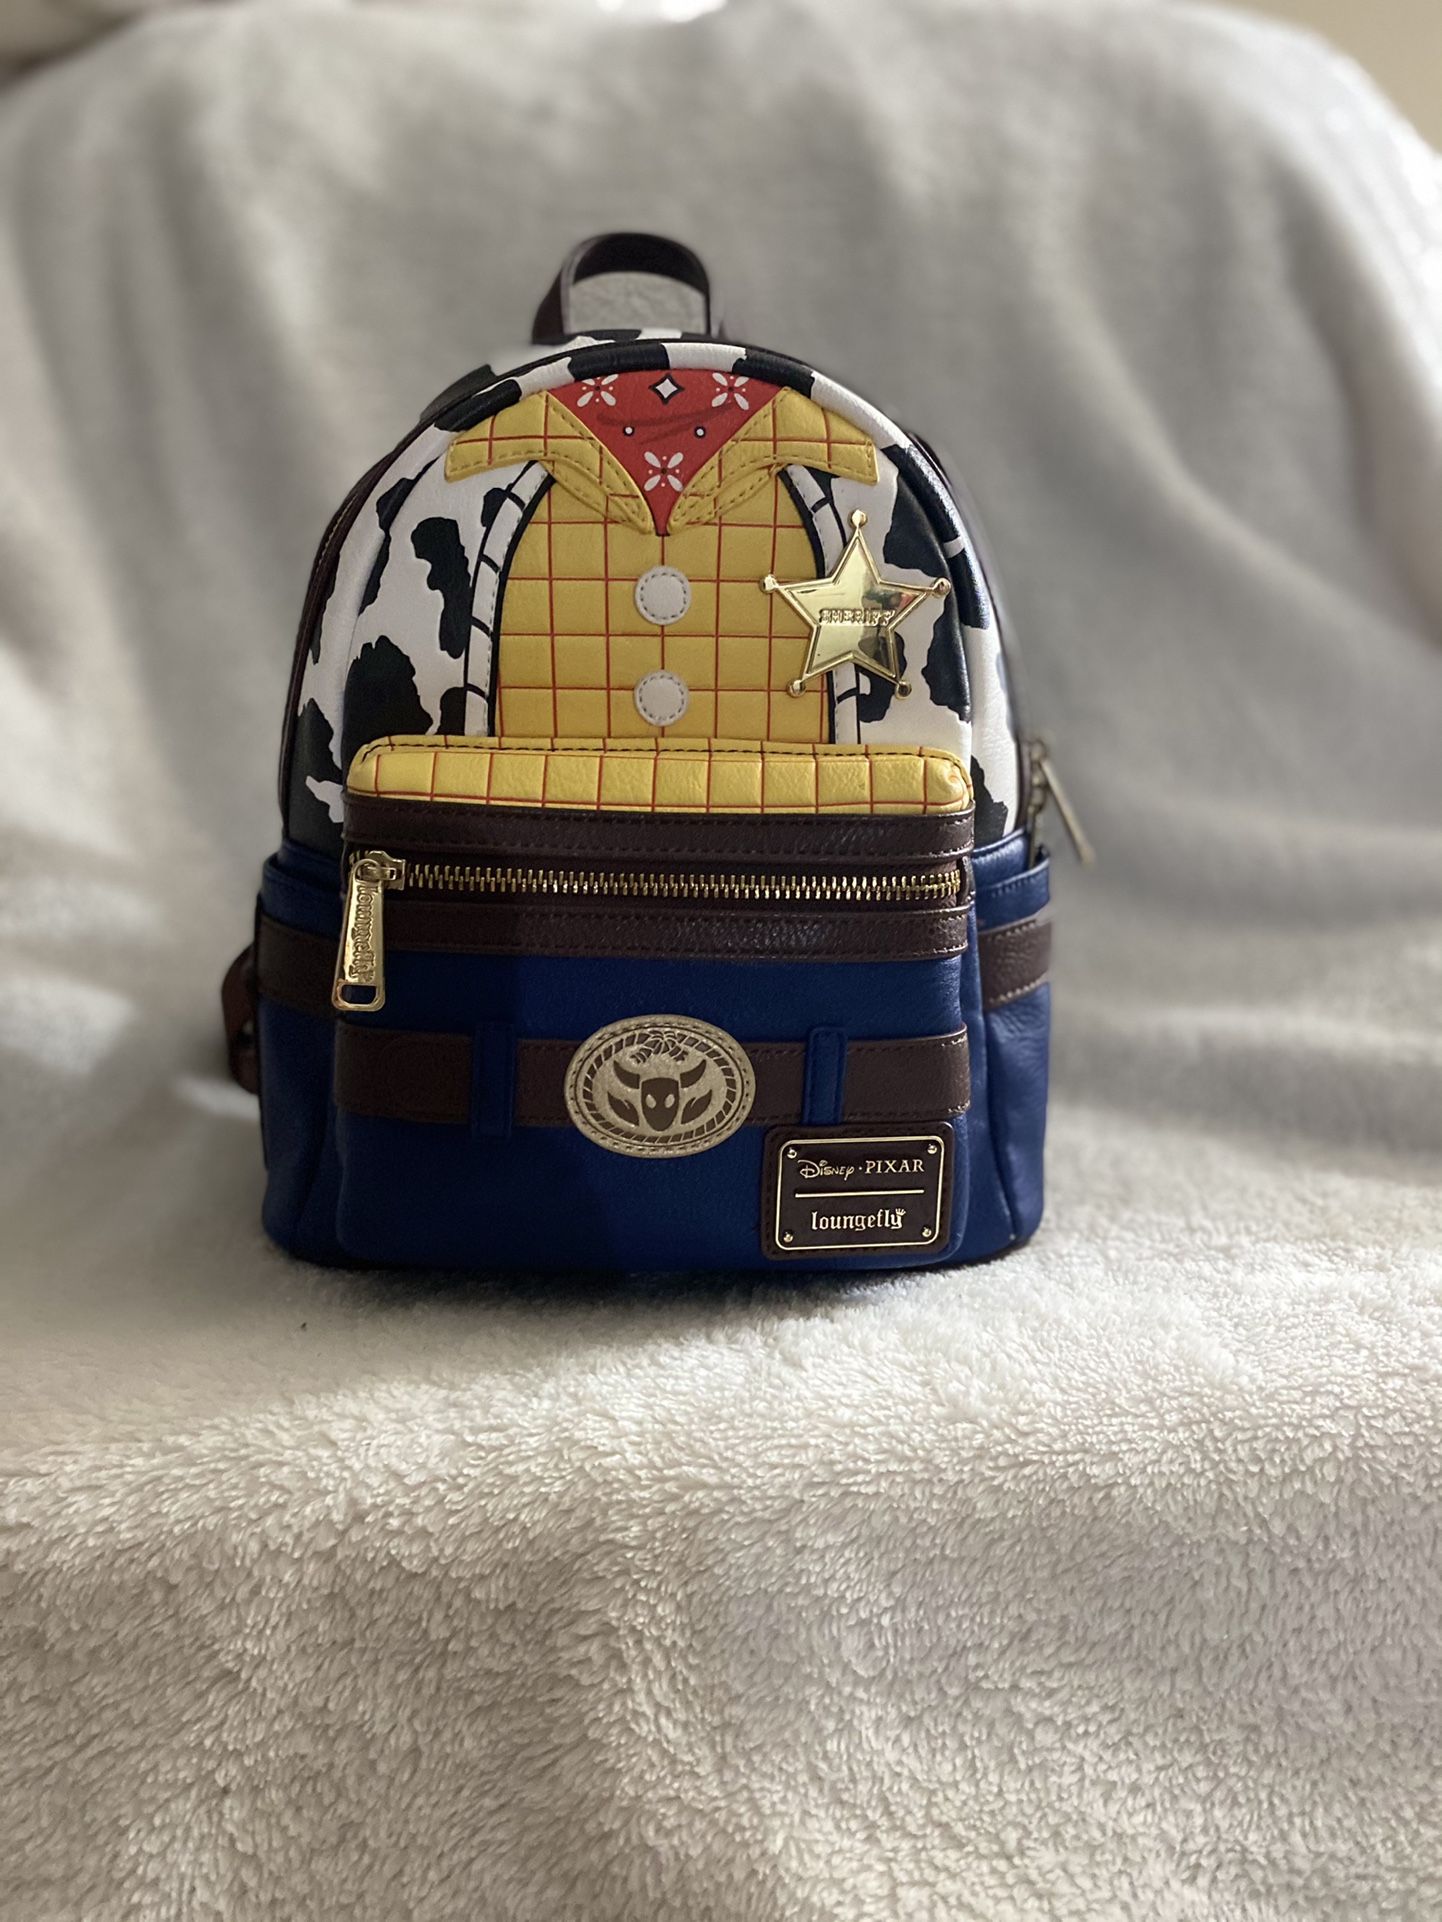 Disney Pixar Loungefly Backpack Toy Story 